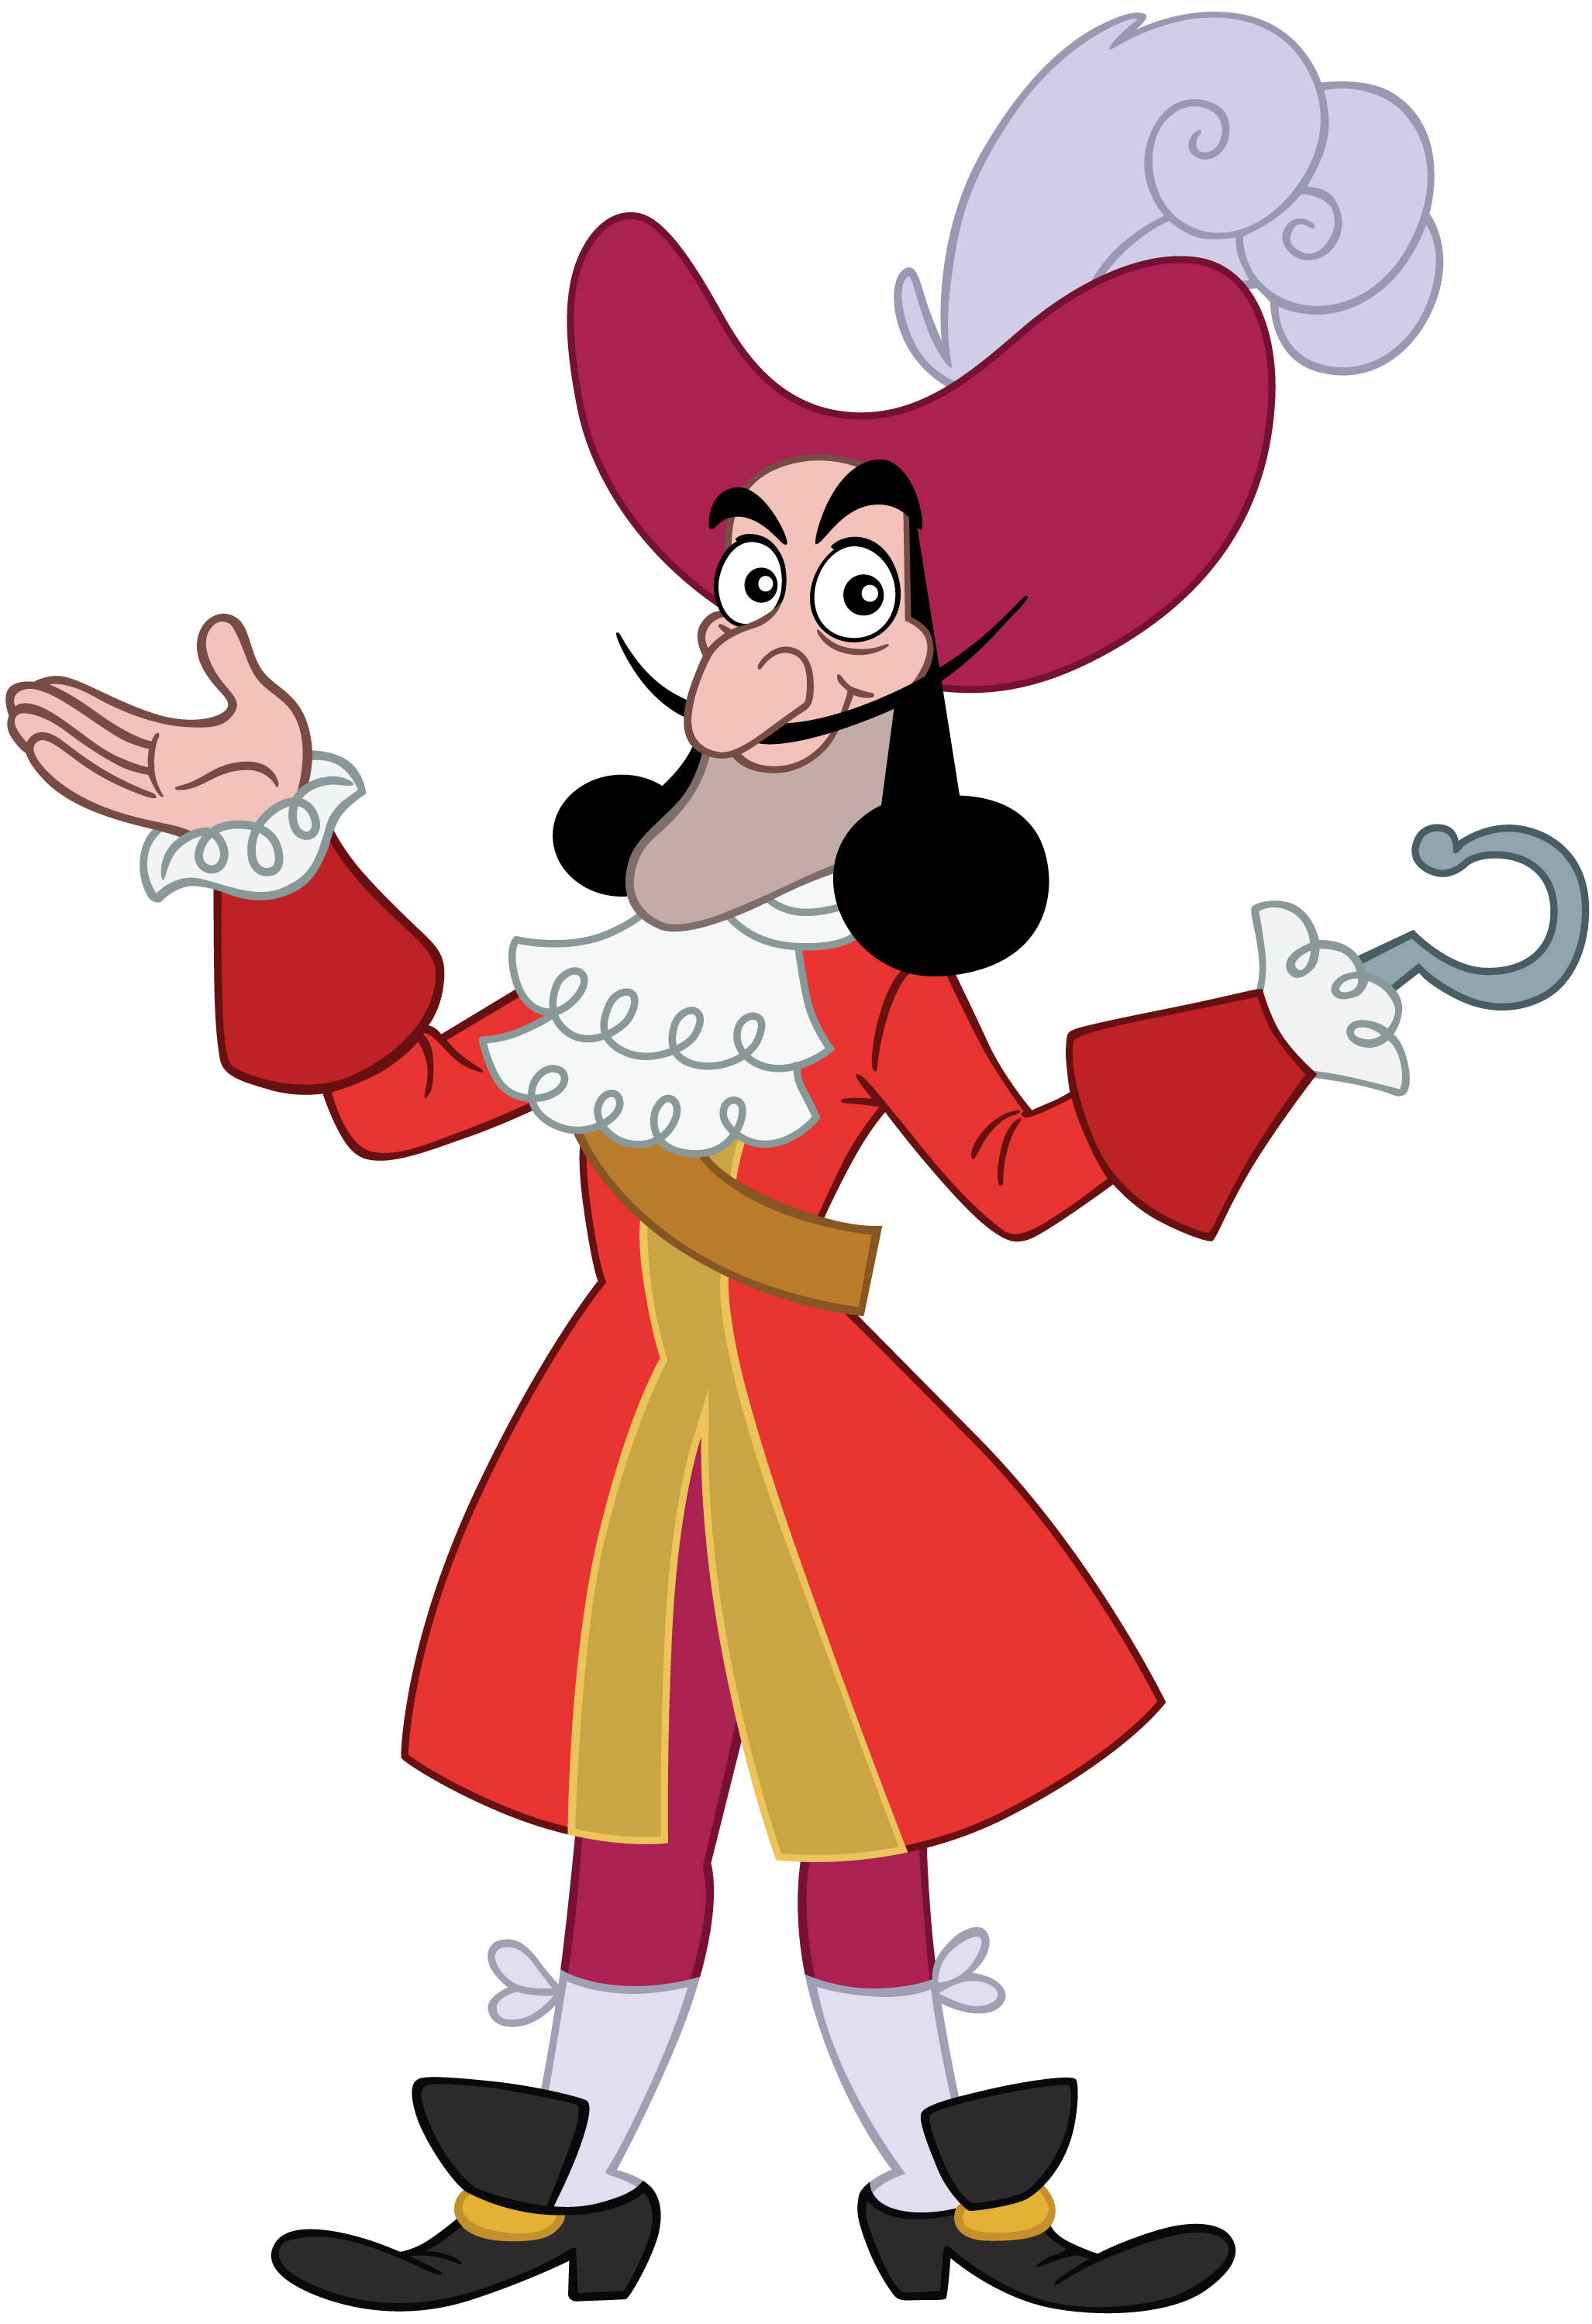 Captain Hook   Jake And The Never Land Pirates Wiki